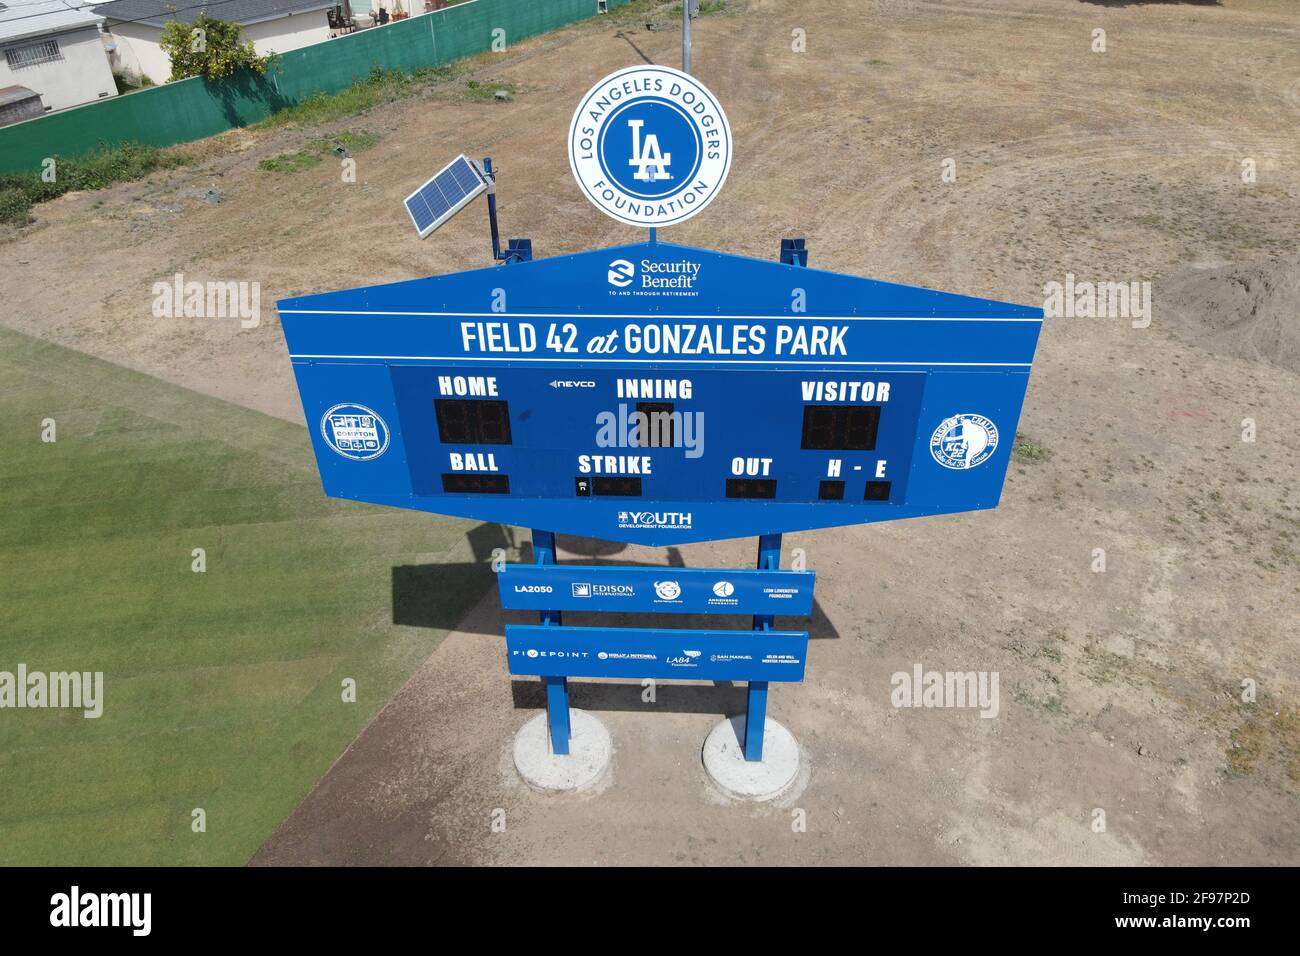 A general view of scoreboard at Field 42 at Los Angeles Dodgers Dreamfields project at Gonzales Park on Jackie Robinson Day, Thursday, April 15, 2021, Stock Photo